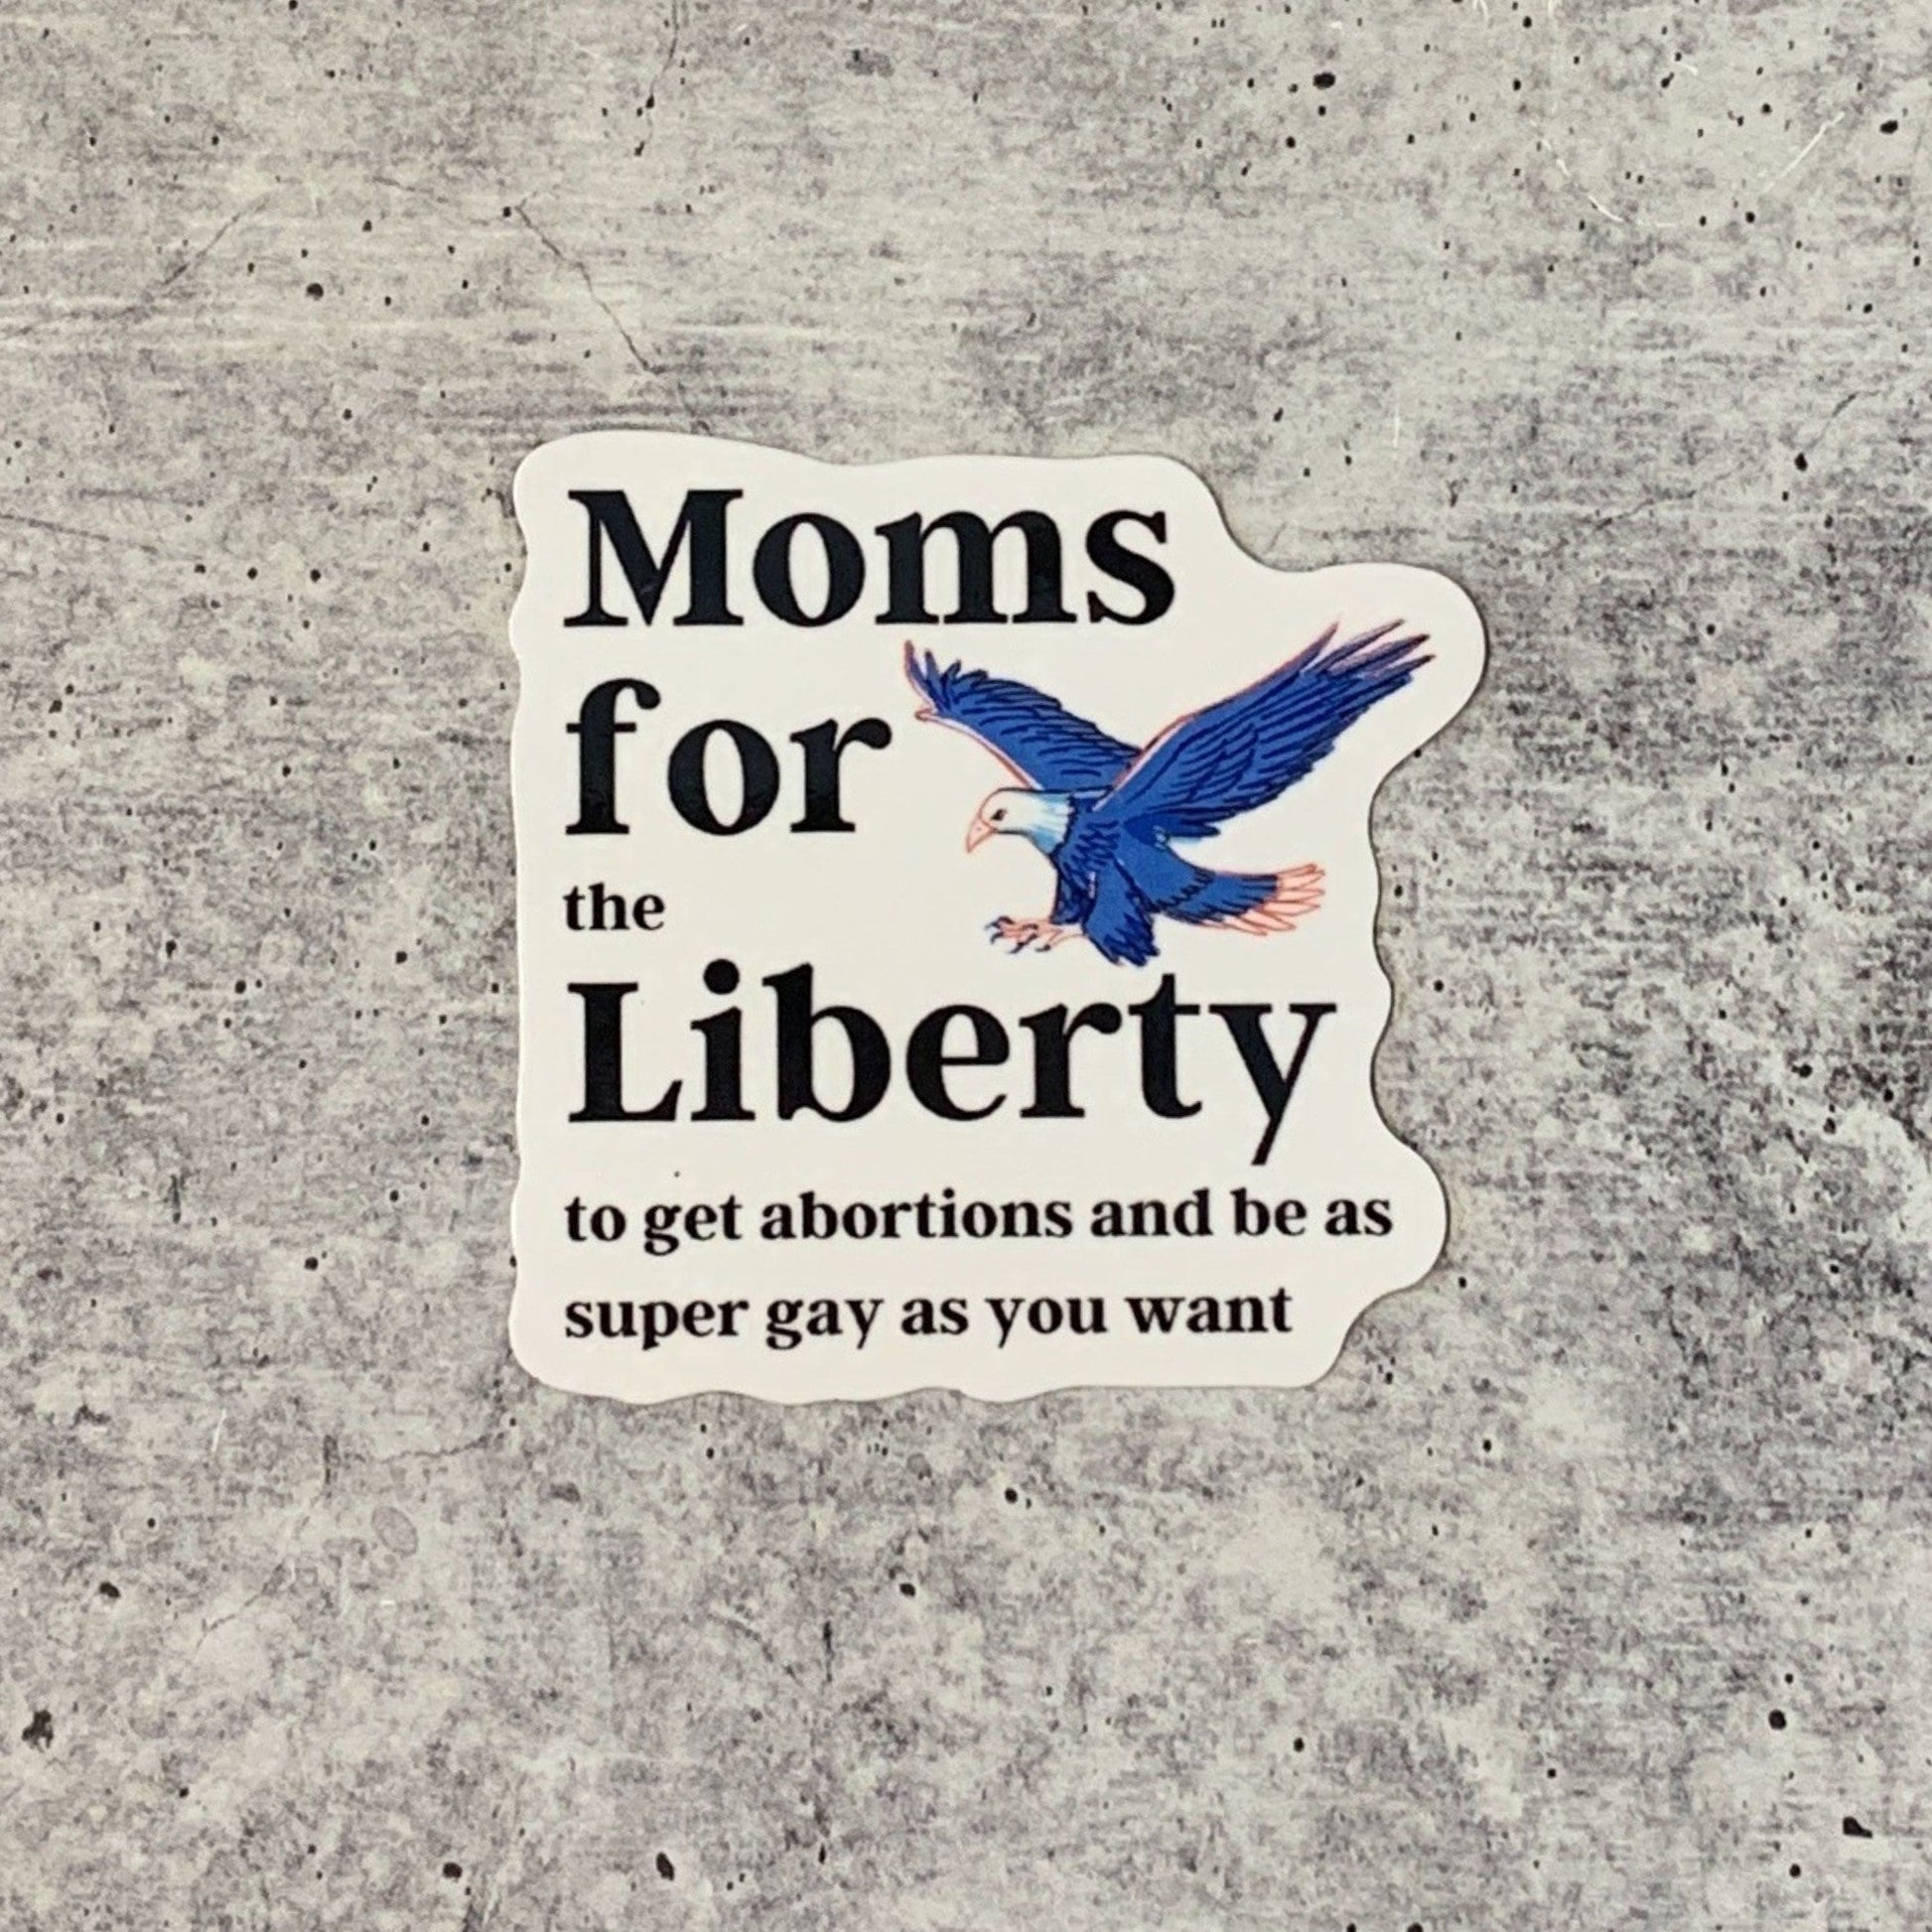 [SATIRE] Moms For (the) Liberty (to get abortions and be as super gay as you want) Vinyl Sticker